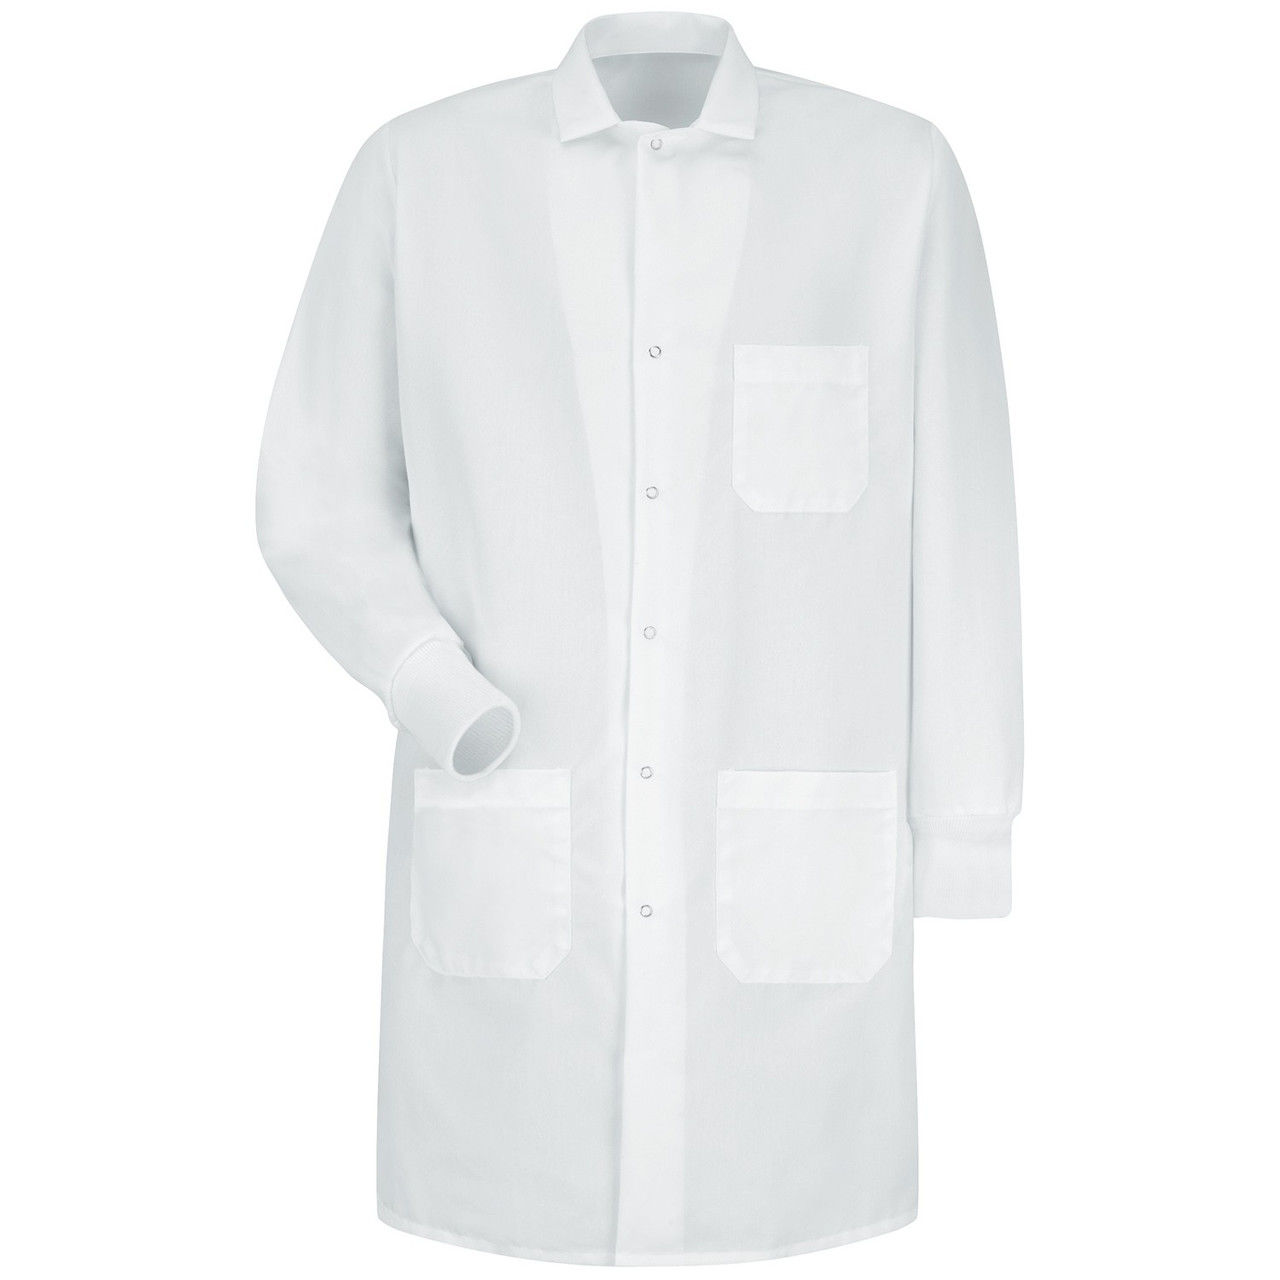 What to look for when buying a lab coat?